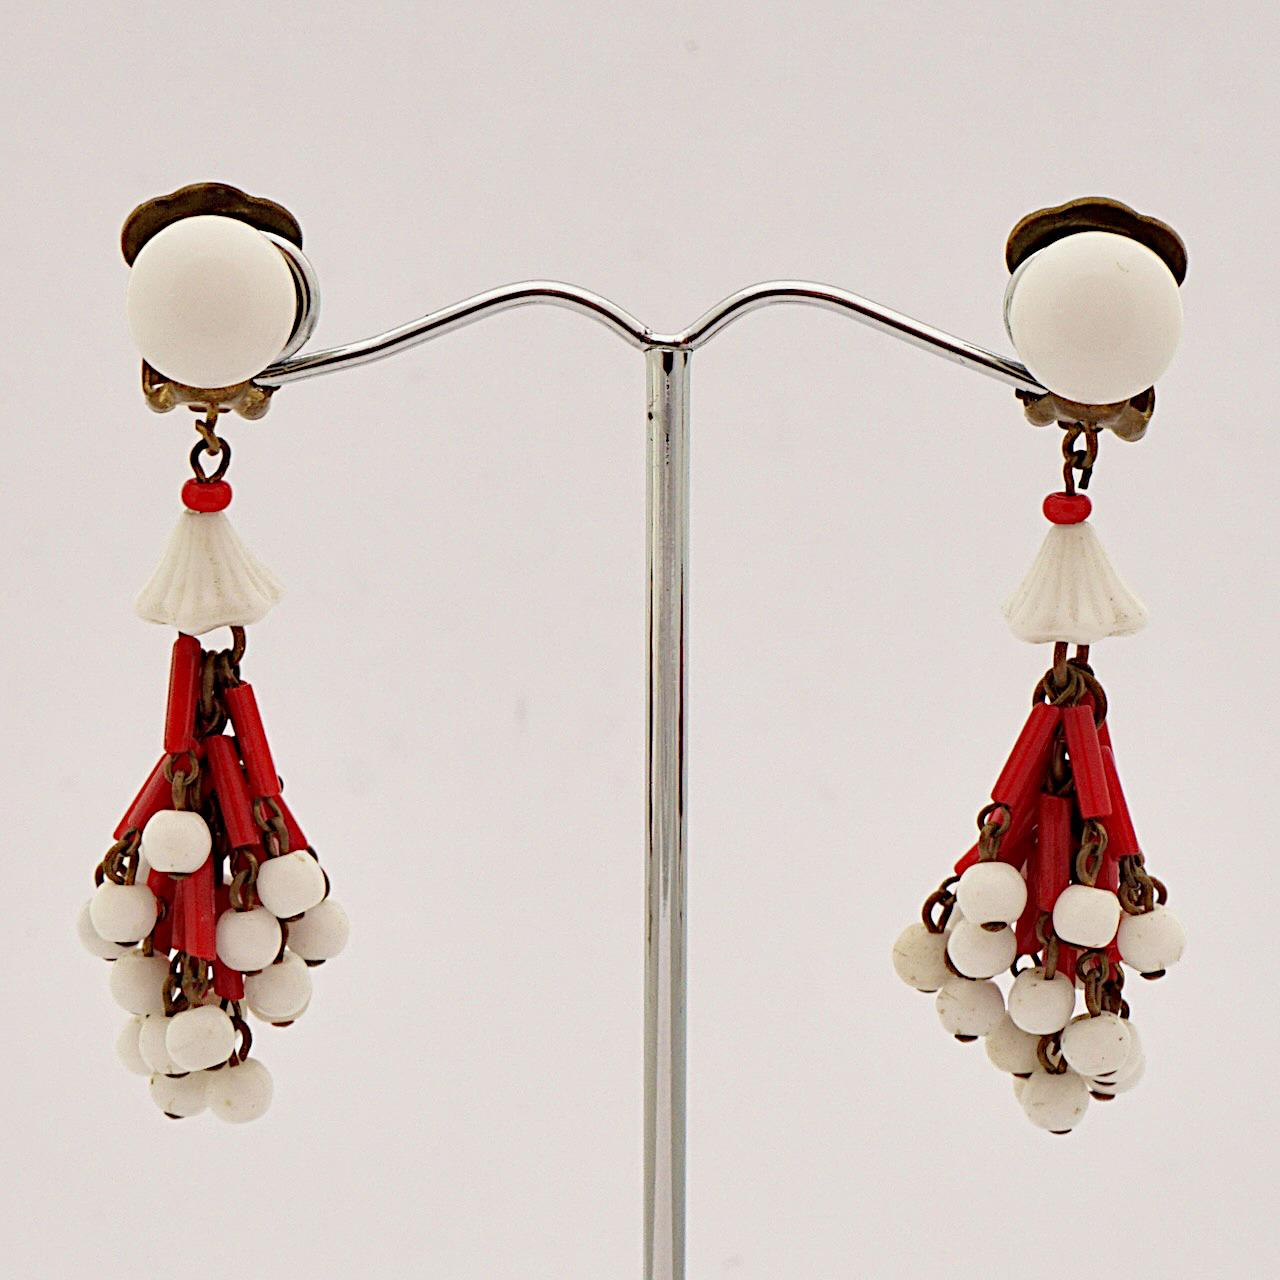 Wonderful gold plated drop clip on earrings, featuring red and milk glass beads. Measuring length 5.5 cm / 2.16 inches. There is wear to the gold plating.

This is a beautiful and stylish pair of vintage drop earrings circa 1940s.